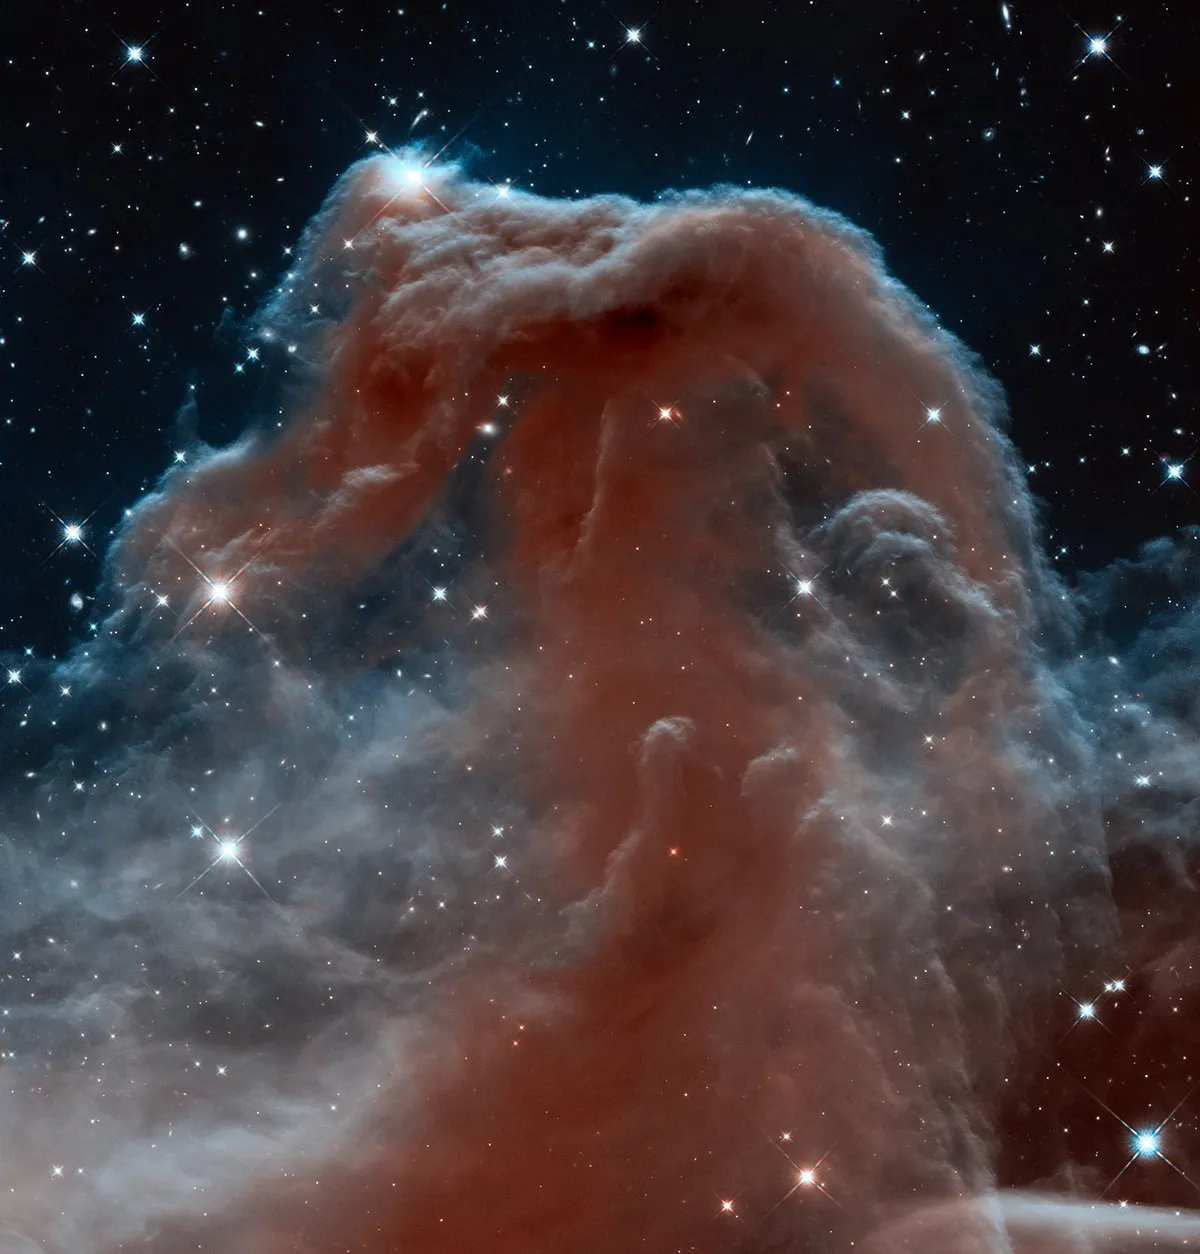 Horsehead in infrared 19 April 2013. Released to celebrate the telescope’s 23rd year, this image shows the Horsehead Nebula in infrared light. Credit: NASA, ESA, and the Hubble Heritage Team (AURA/STScI)